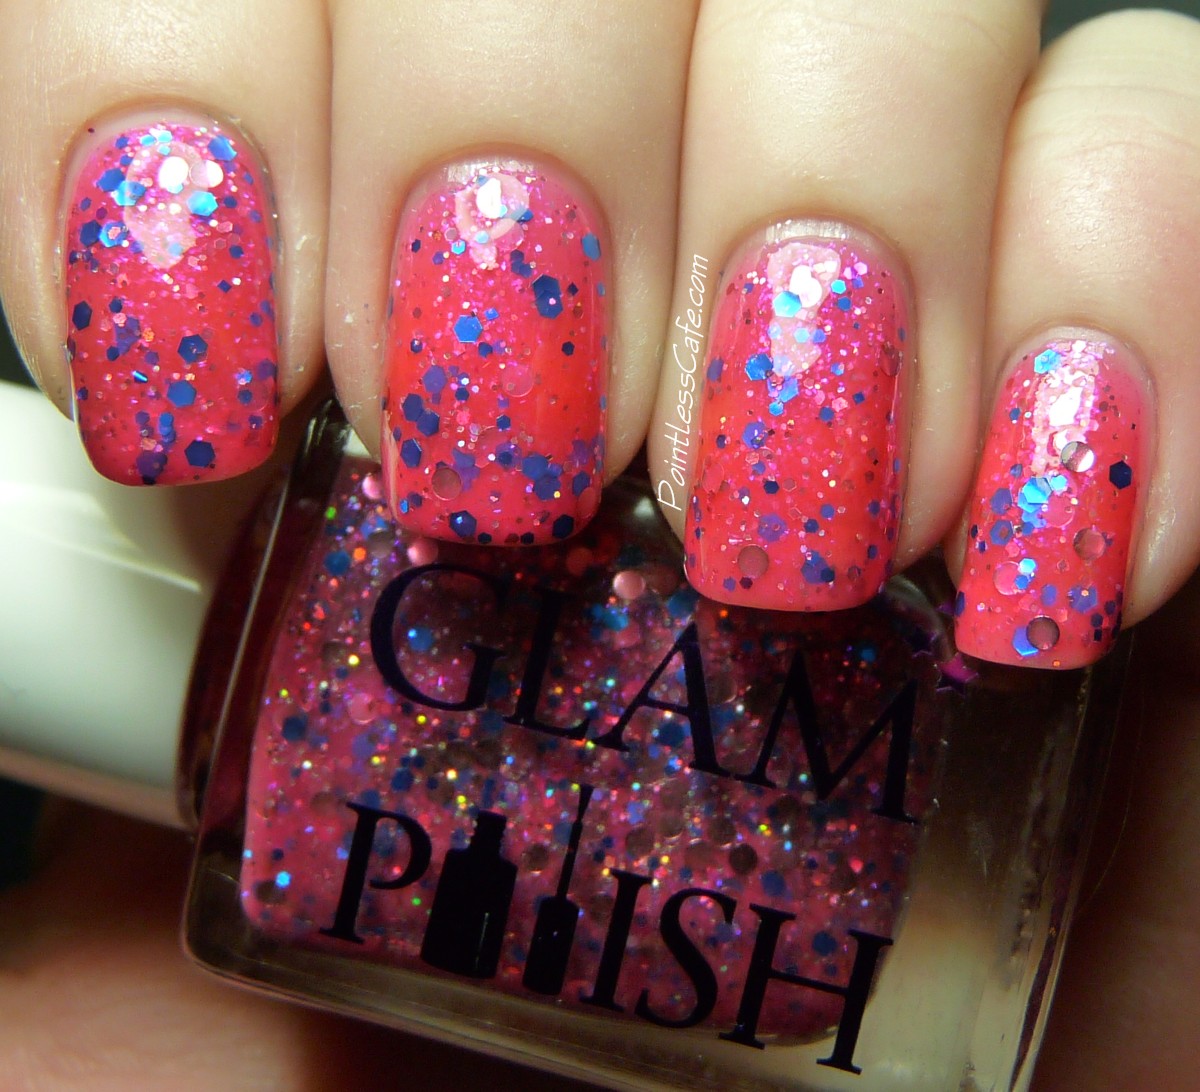 Glam Polish - Jem - Swatches and Review | Pointless Cafe